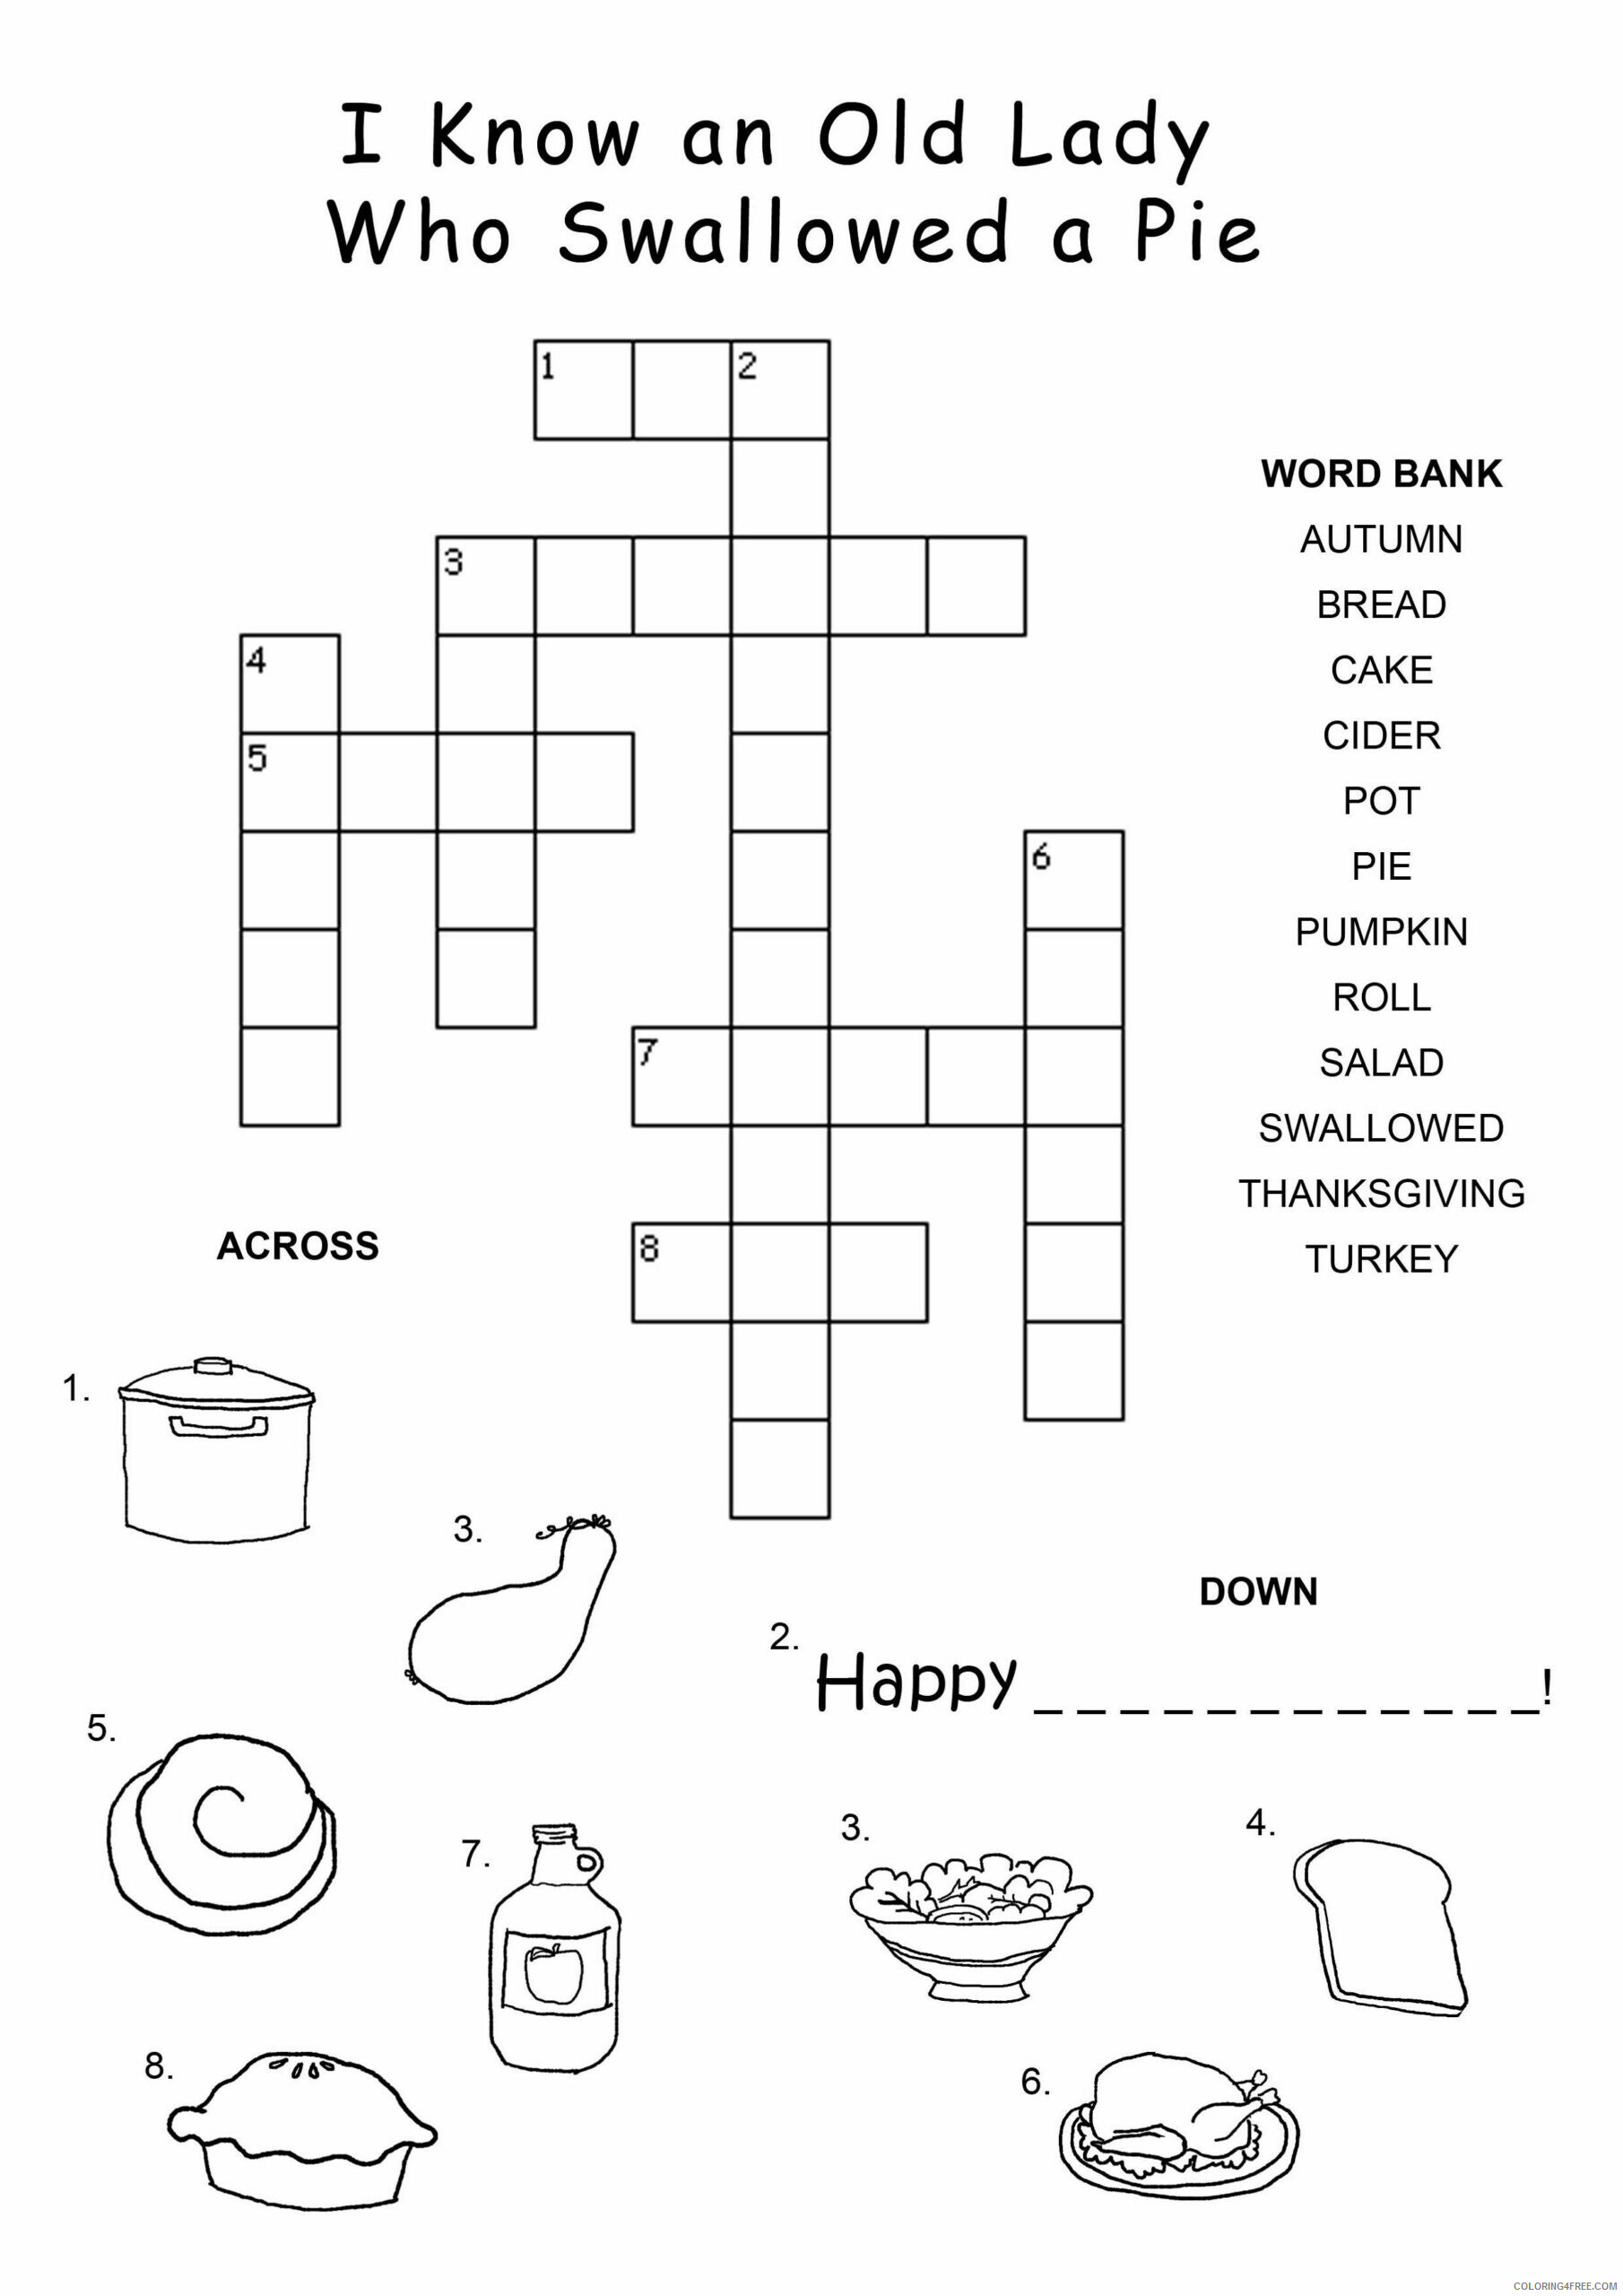 crossword-puzzle-coloring-pages-free-crossword-puzzles-for-kids